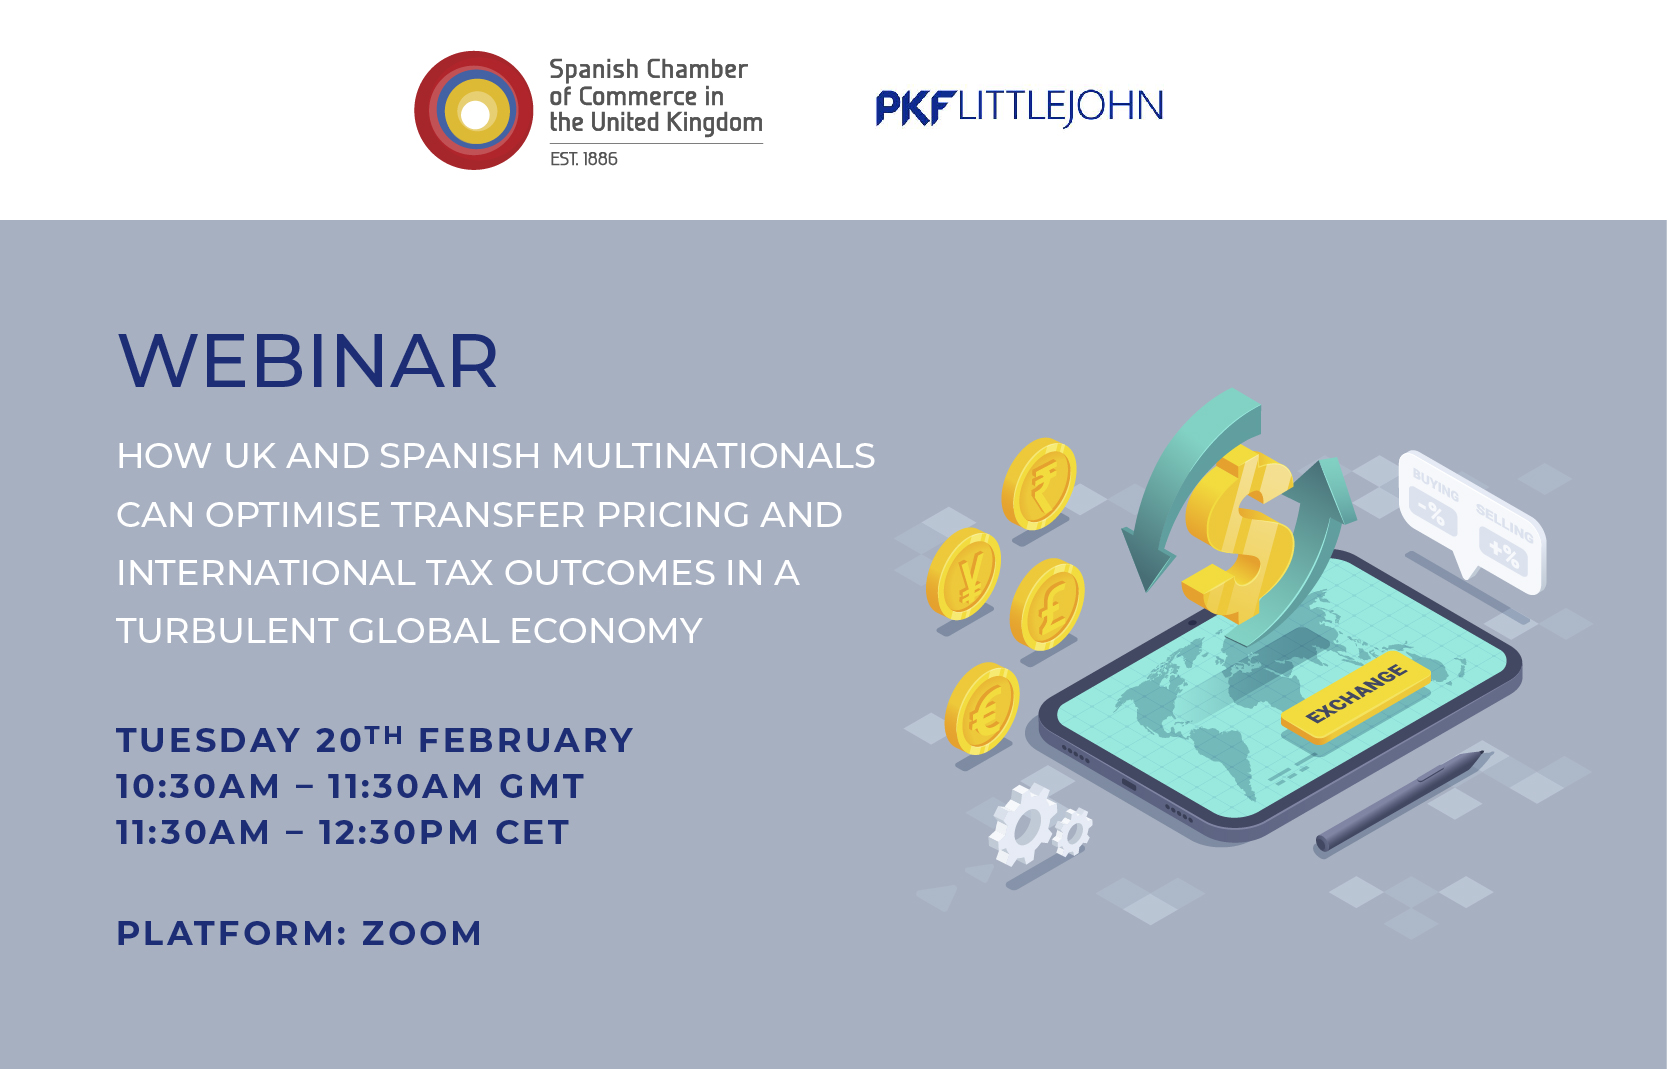 WEBINAR | HOW UK AND SPANISH MULTINATIONALS CAN OPTIMISE TRANSFER PRICING AND INTERNATIONAL TAX OUTCOMES IN A TURBULENT GLOBAL ECONOMY